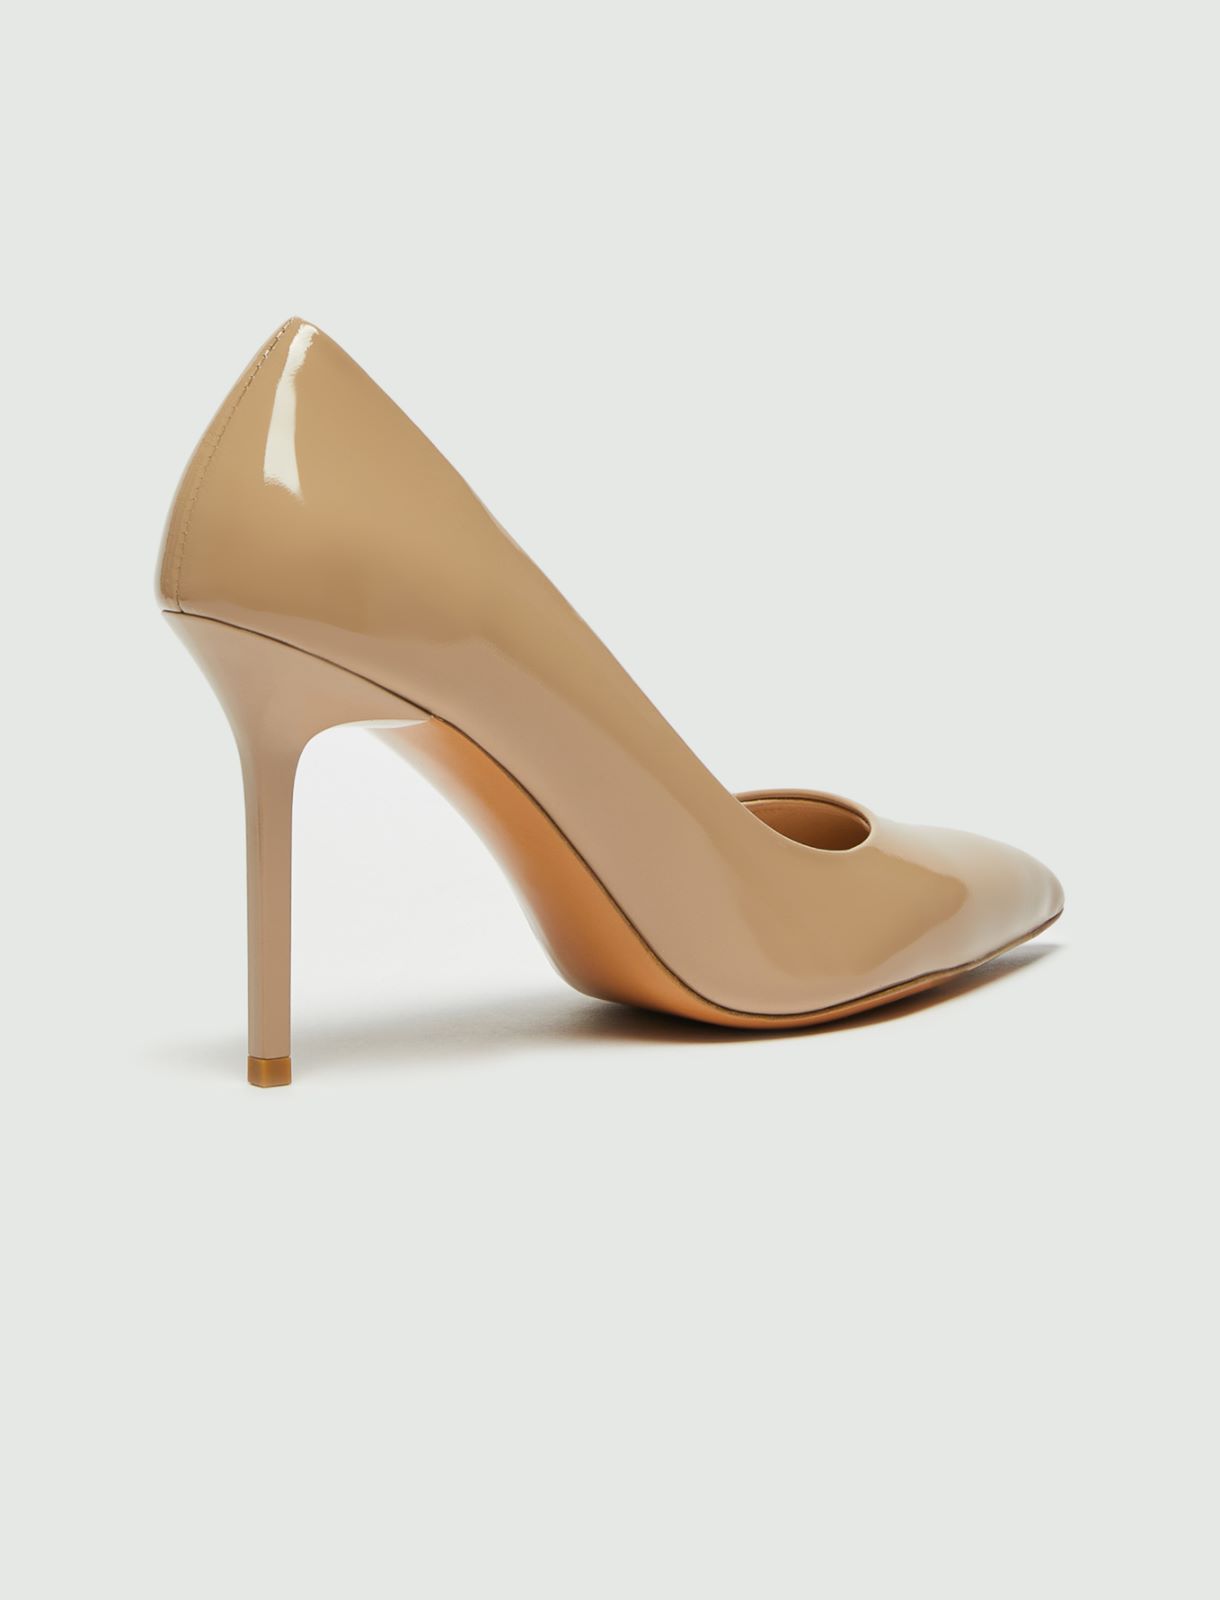 Patent leather court shoes - Nudo - Marella - 3